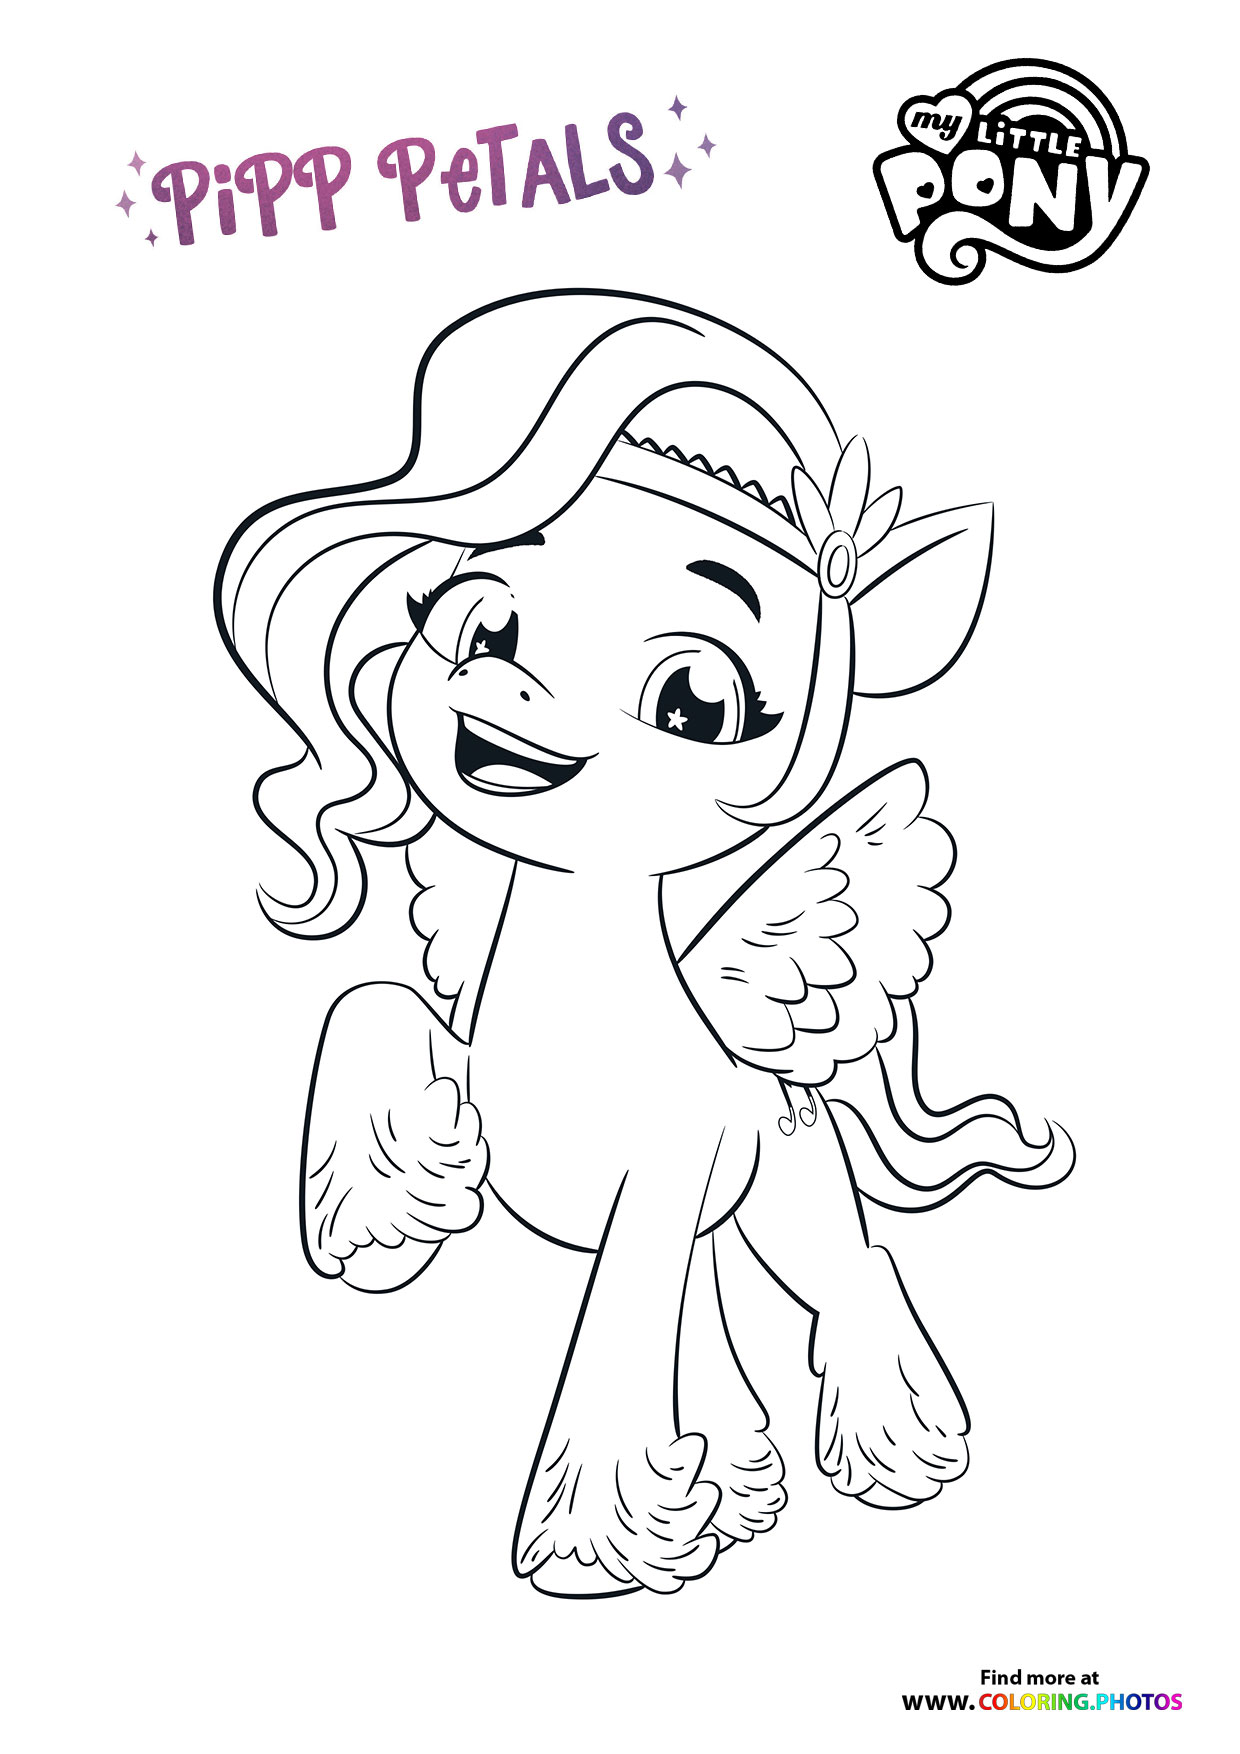 Pipp Petals posing - Coloring Pages for kids